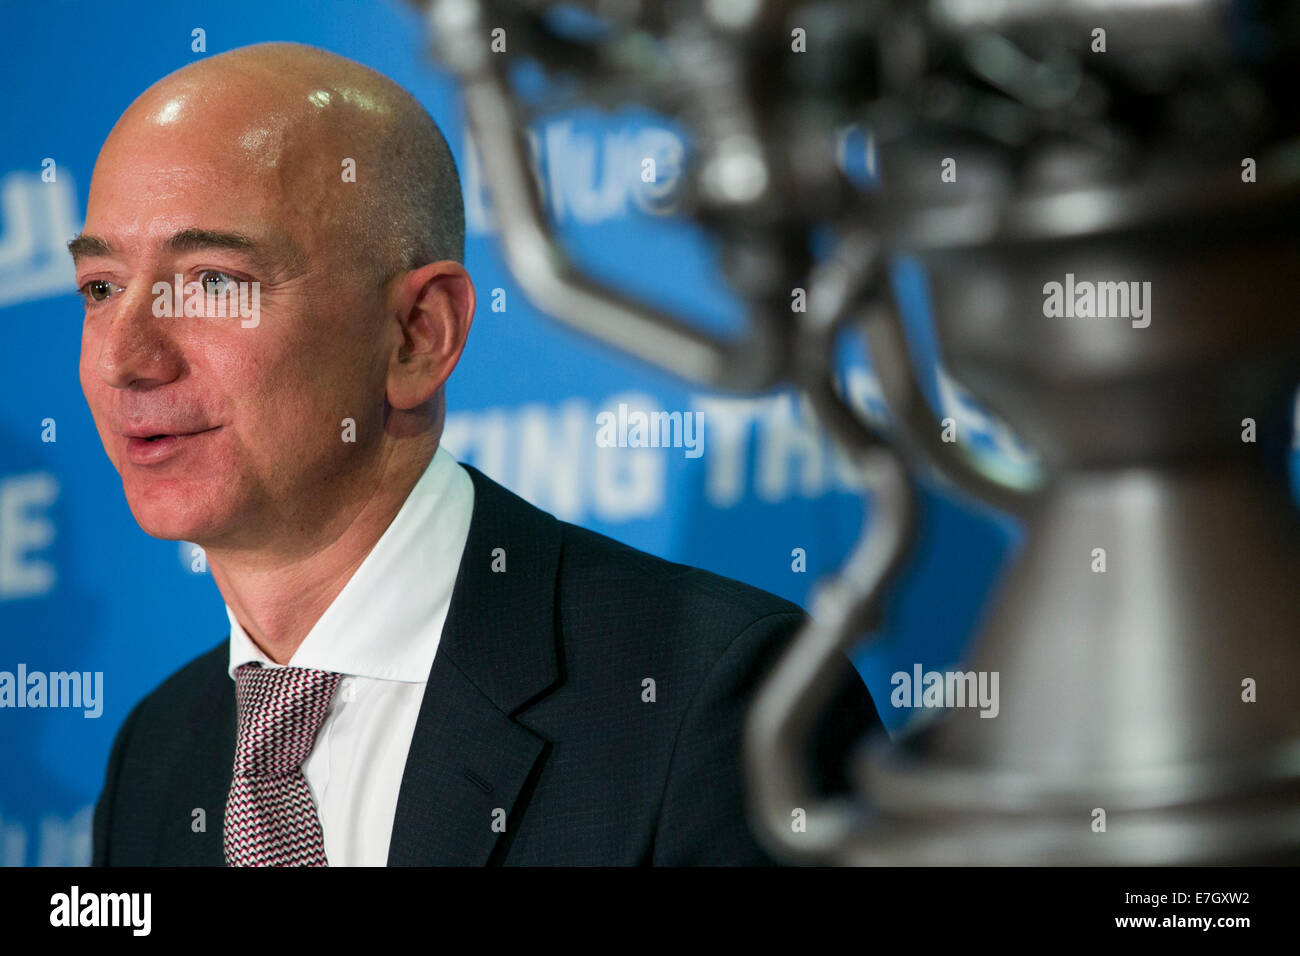 Jeff Bezos, founder of Amazon.com and Blue Origin participates in a press conference to unveil the BE-4 Rocket Engine at the National Press Club in downtown Washington, D.C. on September 17, 2014. Blue Origin and the United Launch Alliance (ULA) have entered into an agreement to jointly develop the new engine. Stock Photo